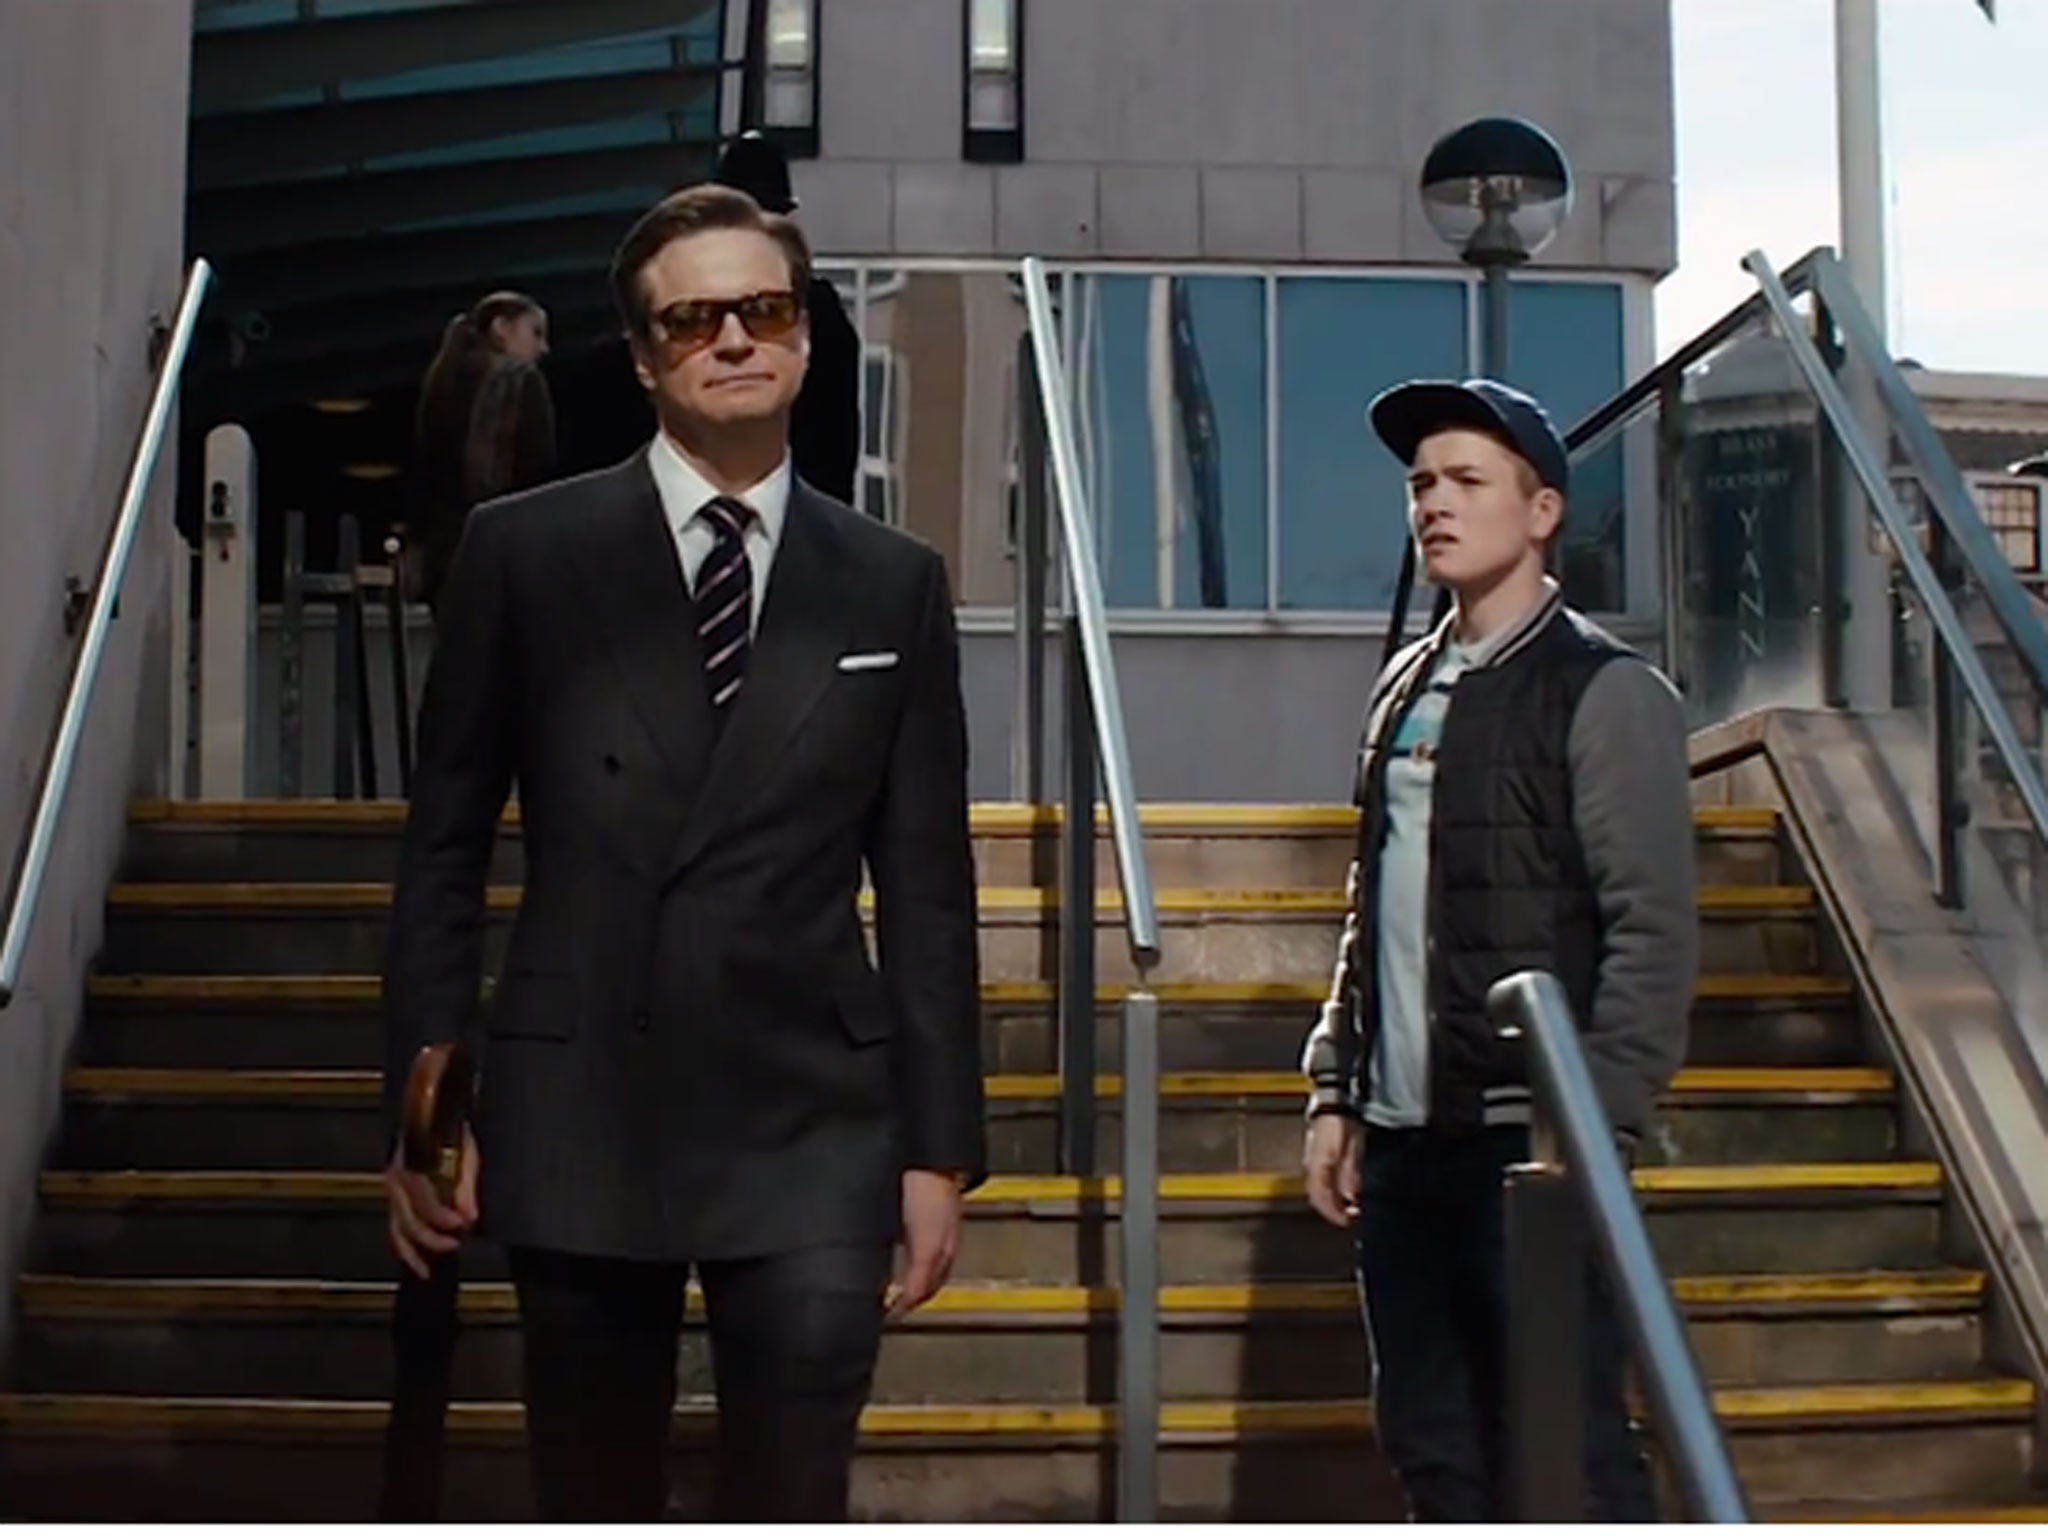 Colin Firth stars as MI6 agent Uncle Jack with Taron Egerton in Kingsman: The Secret Service